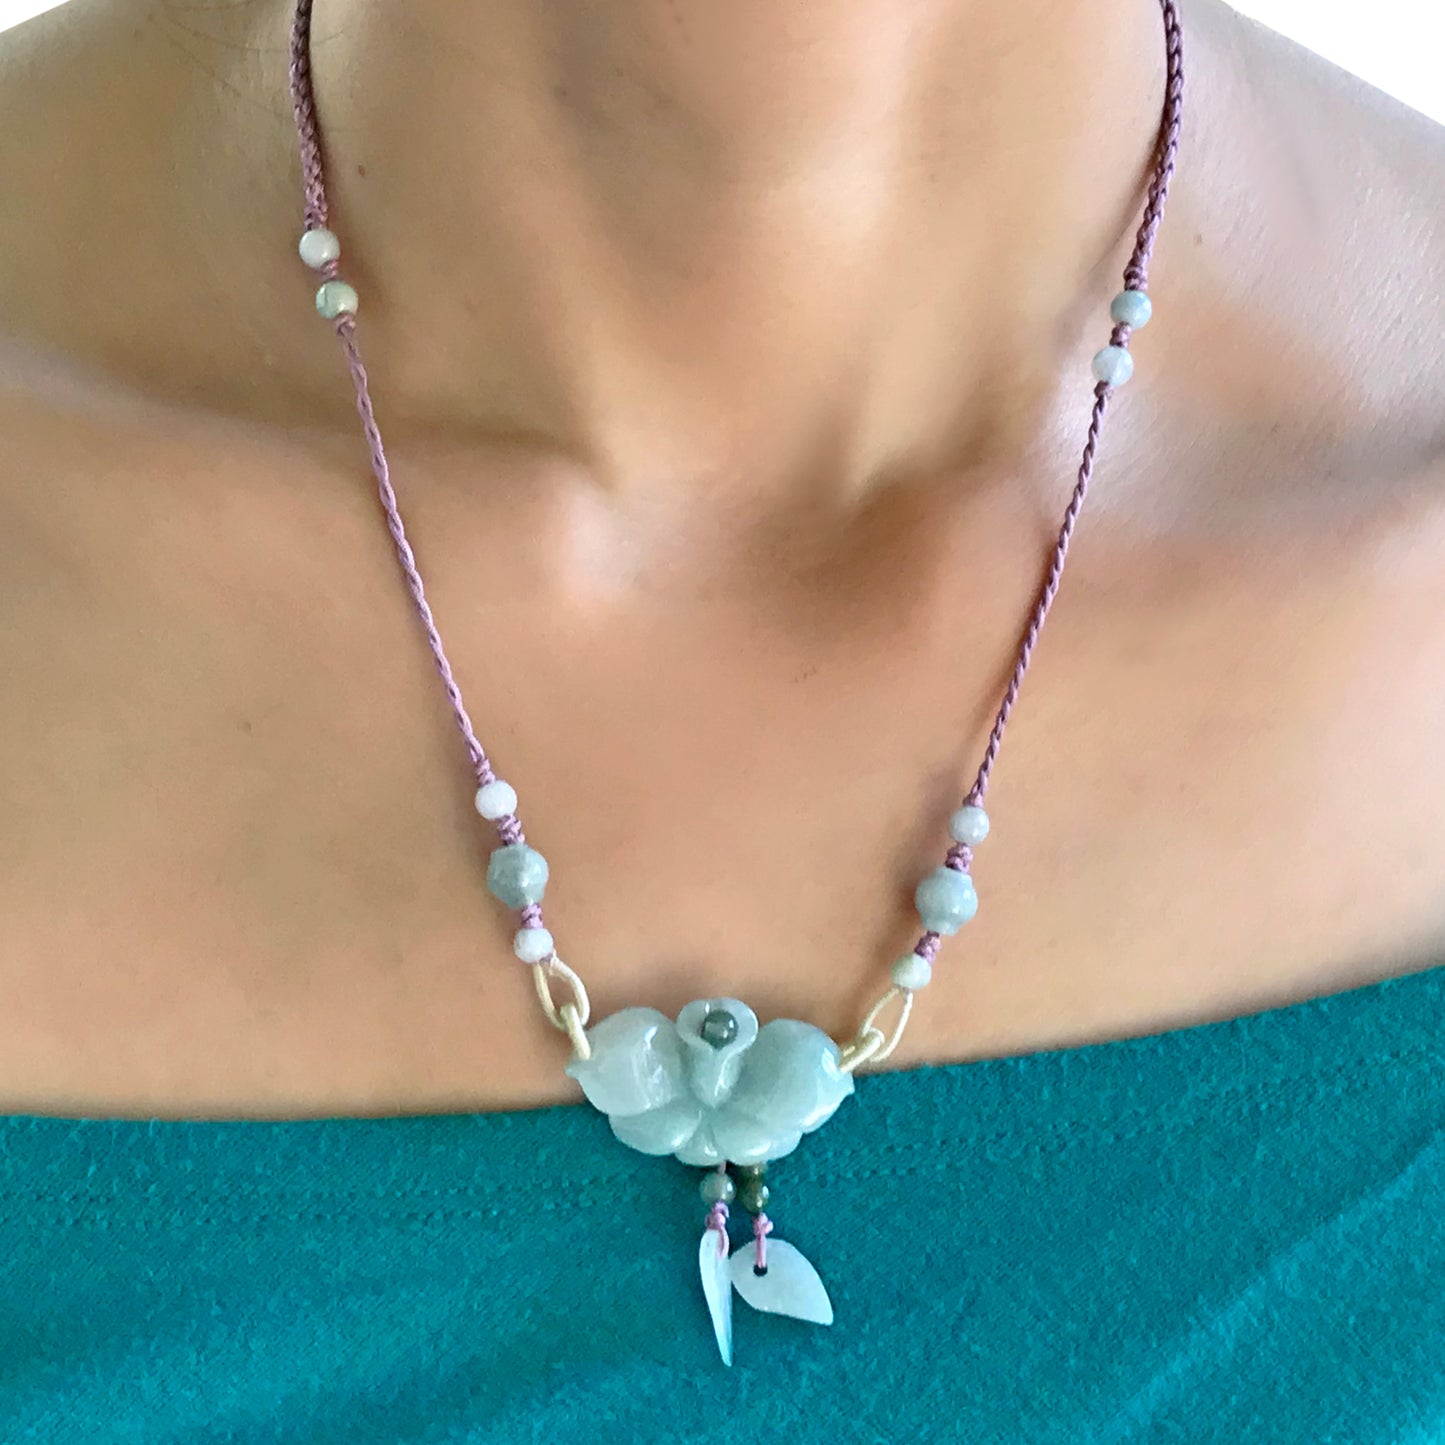 Handcrafted Elegance - Mini Orchid Jade Necklace made with Lavender Cord